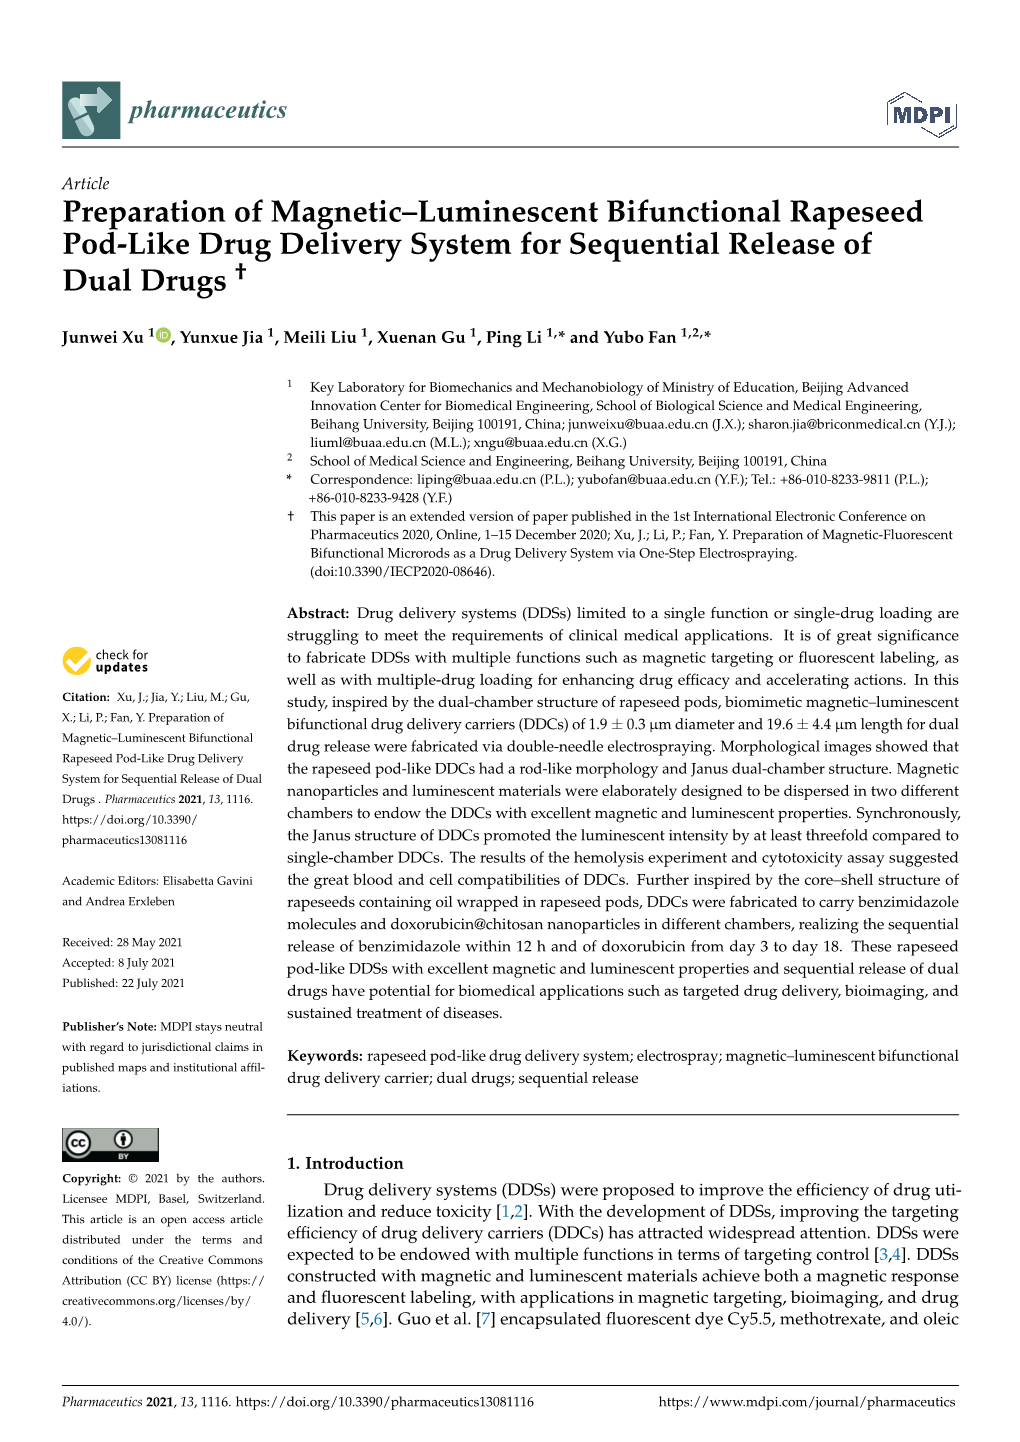 Preparation of Magnetic–Luminescent Bifunctional Rapeseed Pod-Like Drug Delivery System for Sequential Release of Dual Drugs †